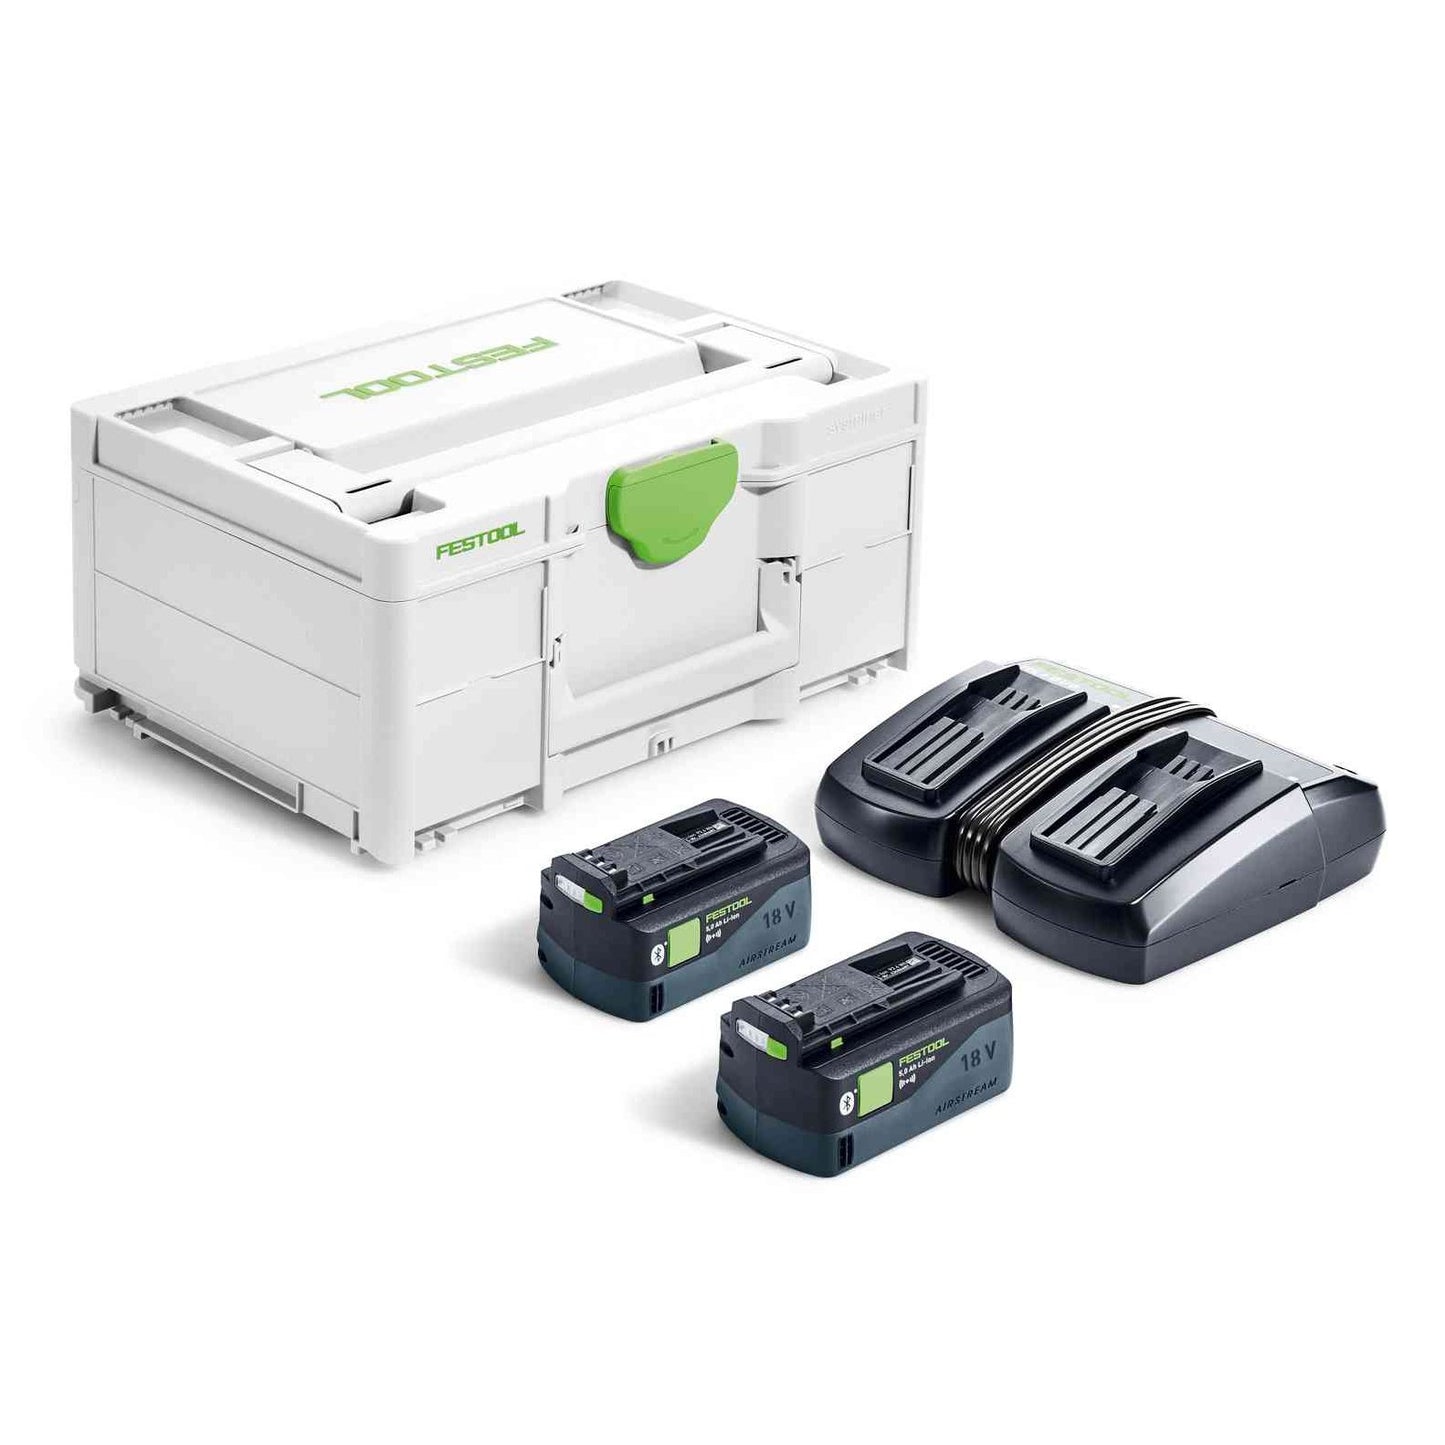 Festool 5 Ah Battery & Charger Set, Energy Set SYS 18V 2x5.0/TCL 6 DUO 577077 tool-junction-nz